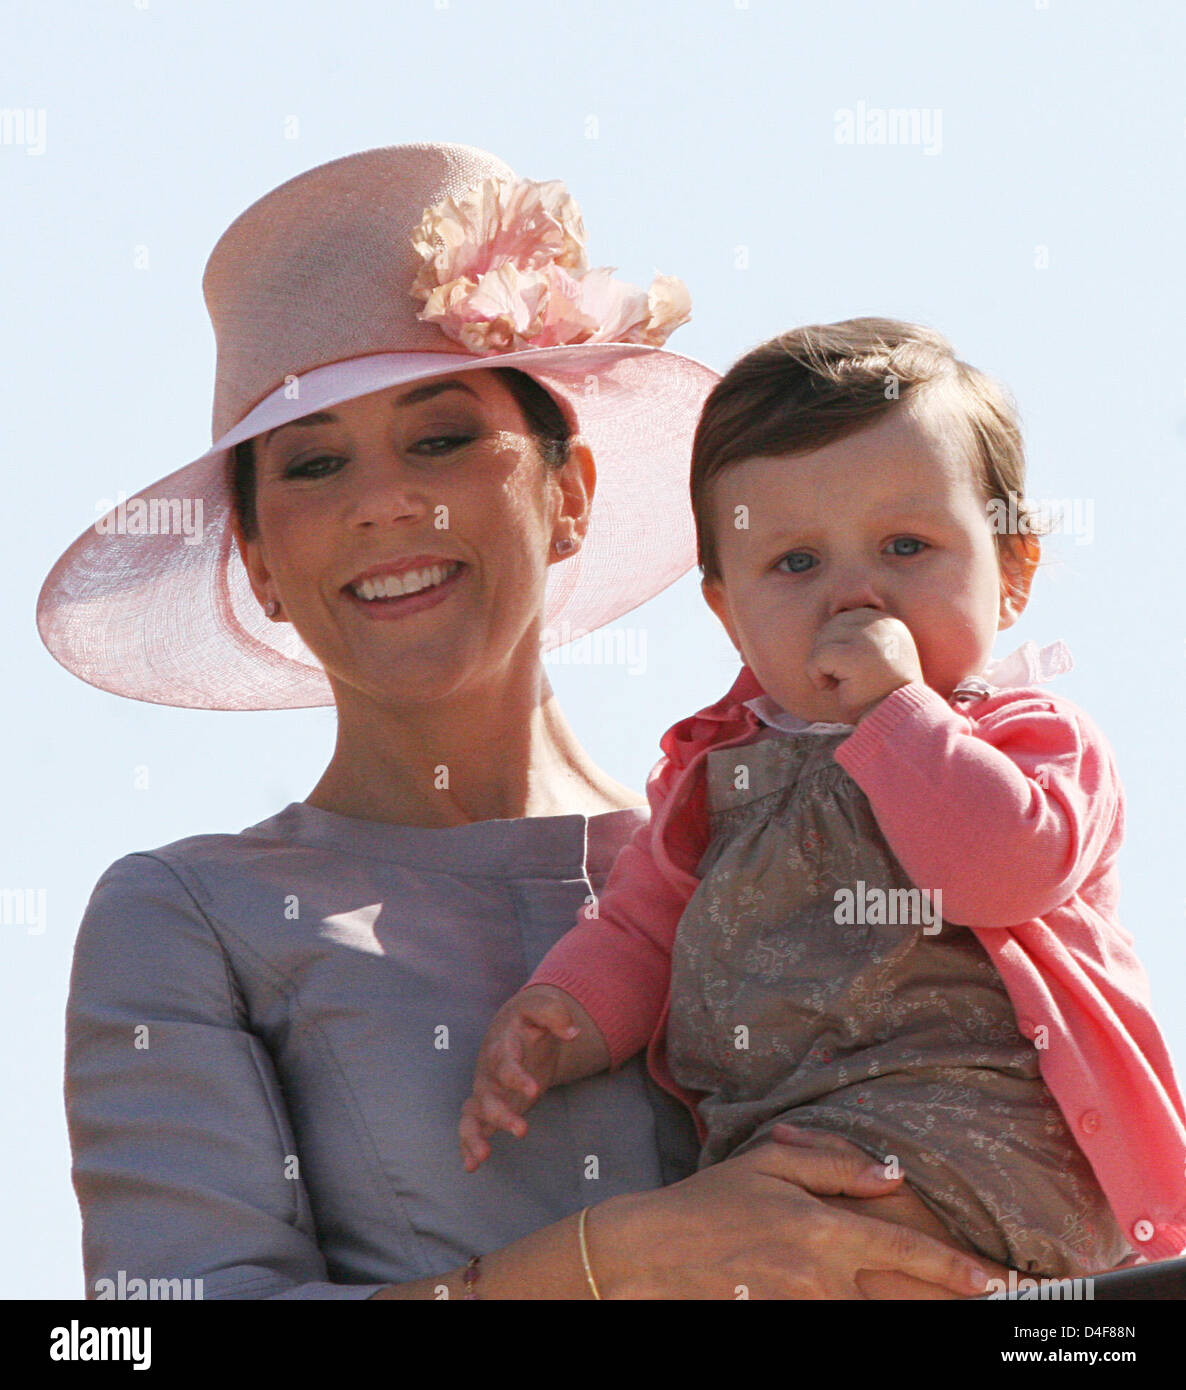 Crown Princess Mary and her daughter Princess Isabella arrive in Svendborg, Denmark, 18 June 2008. The royal family is on a three-day summer cruise through South Denmark on their yacht 'Dannebrog'. Photo: Albert Nieboer (NETHERLANDS OUT) Stock Photo